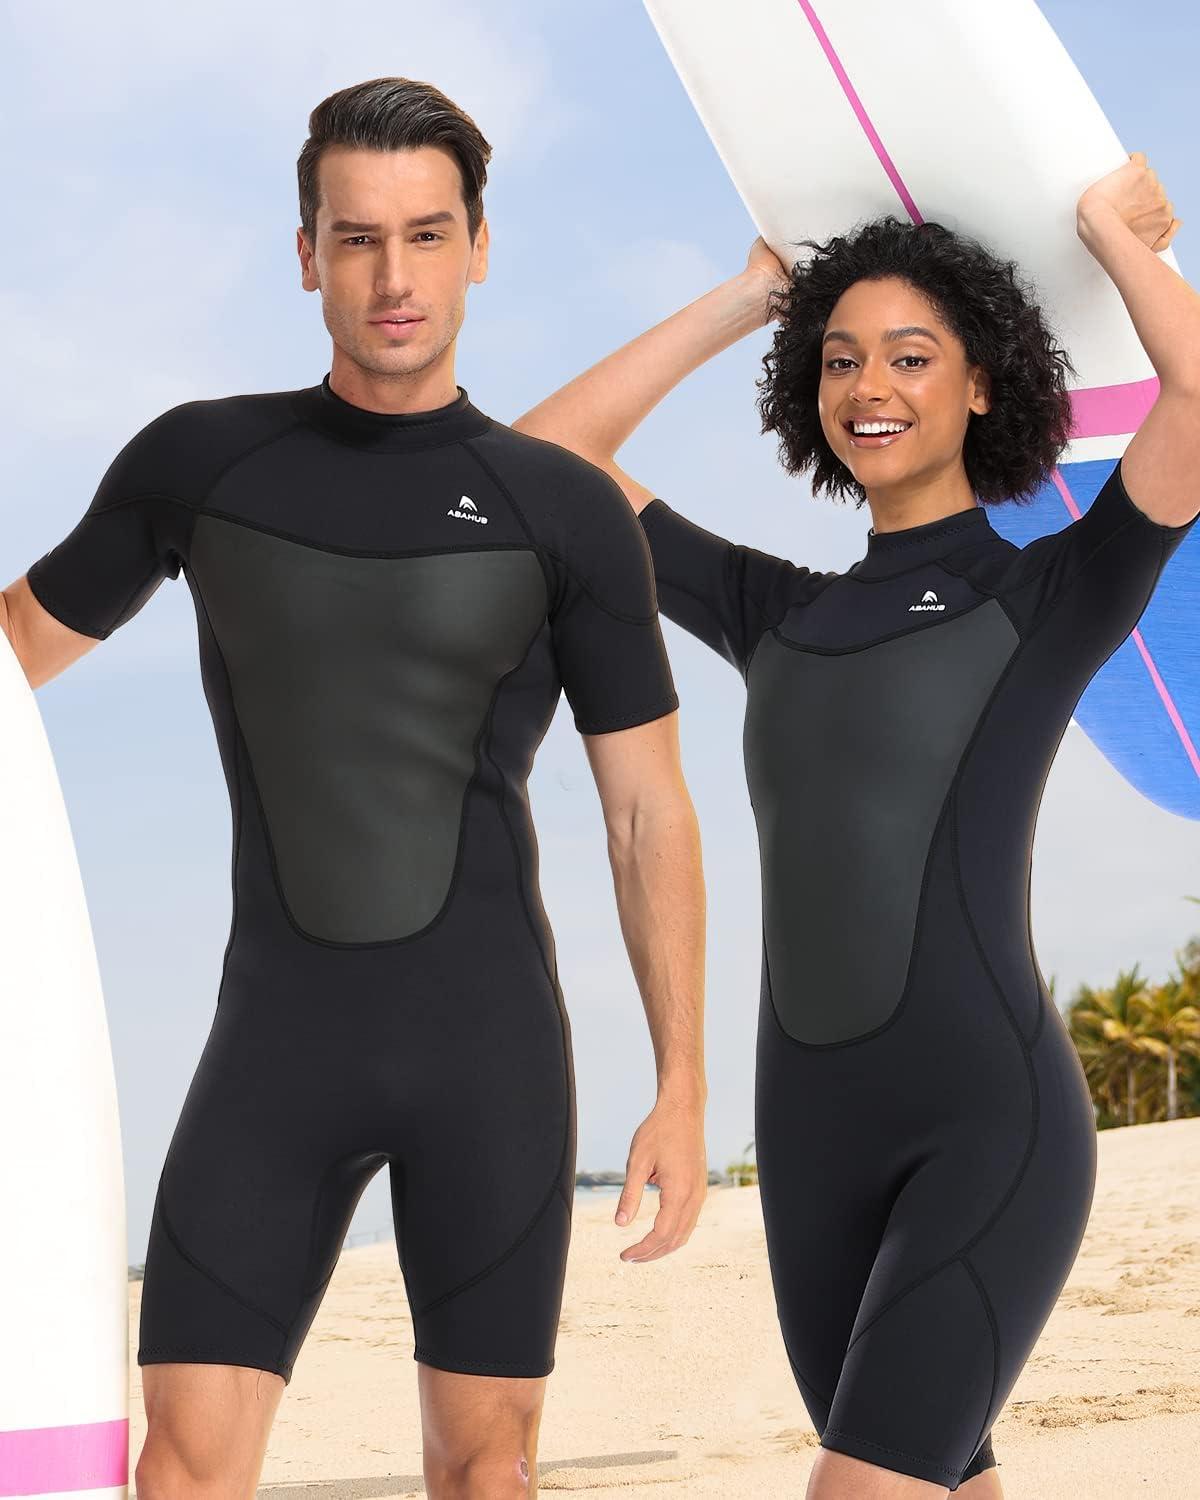 Abahub 2/3mm Men and Women Shorty Wetsuits (7 Sizes), Front/Back Zip Spring  Suit for Snorkeling, Surfing, Kayaking, Scuba Diving, Short Sleeve Neoprene  Wet Suit for Water Sports Black_Men XX-Large